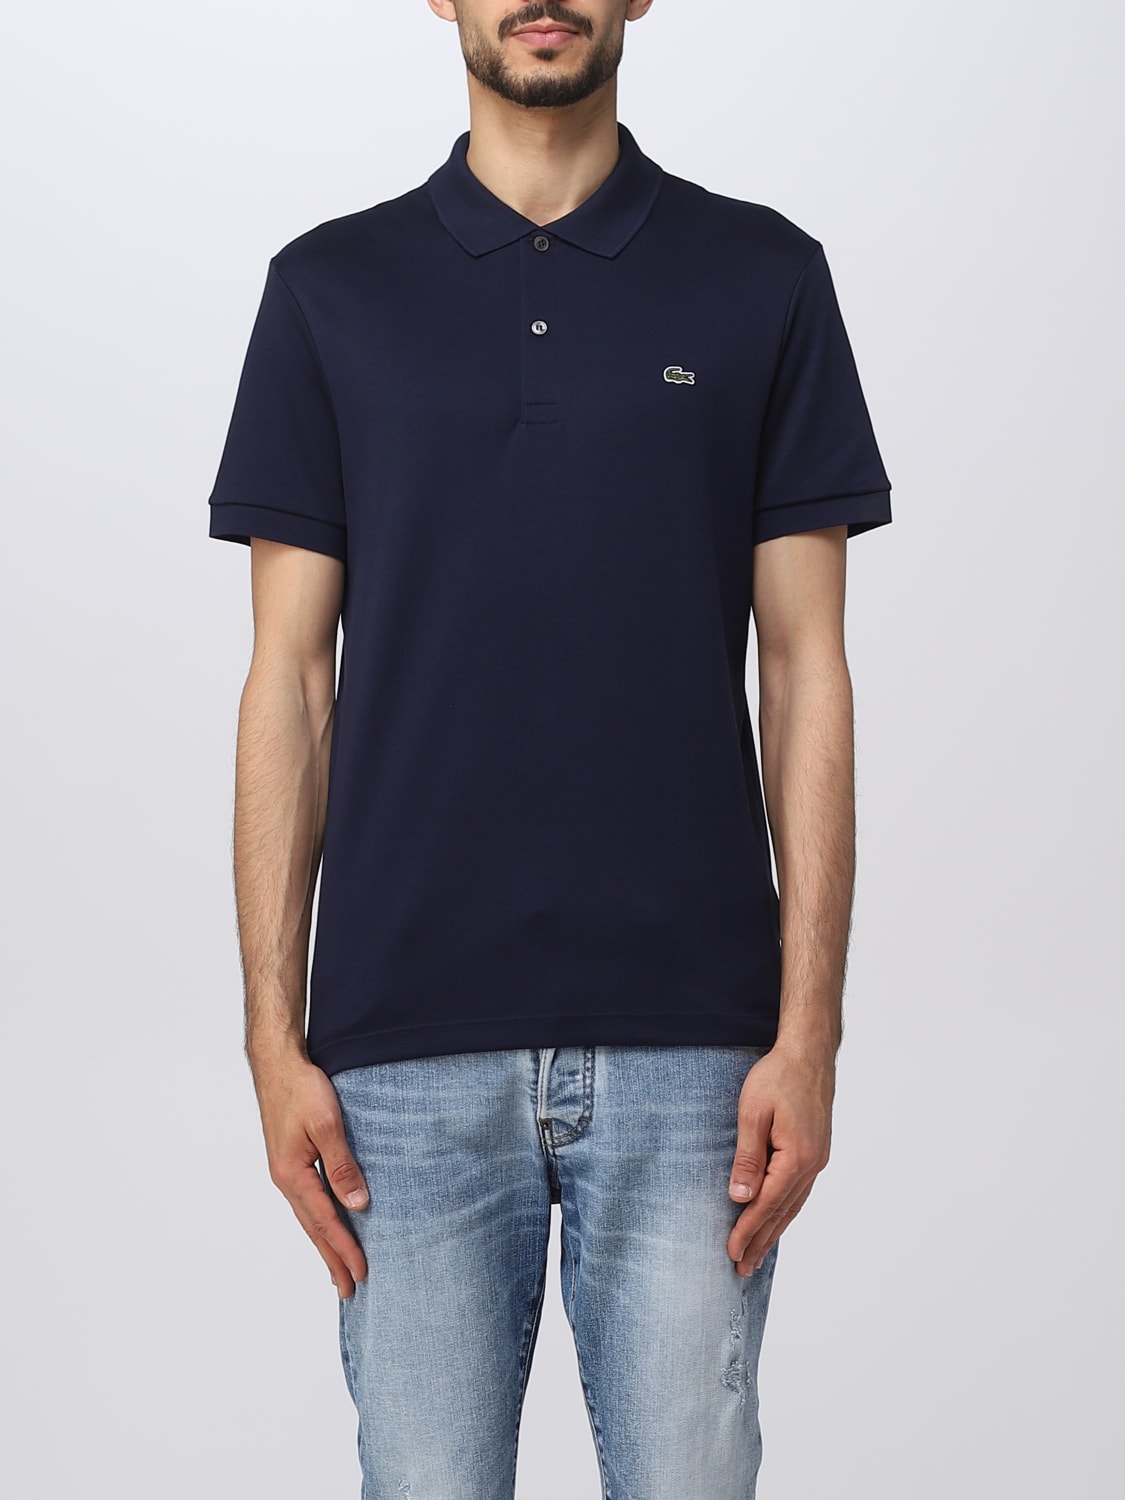 LACOSTE: shirt for man - Navy polo shirt DH2050 on GIGLIO.COM